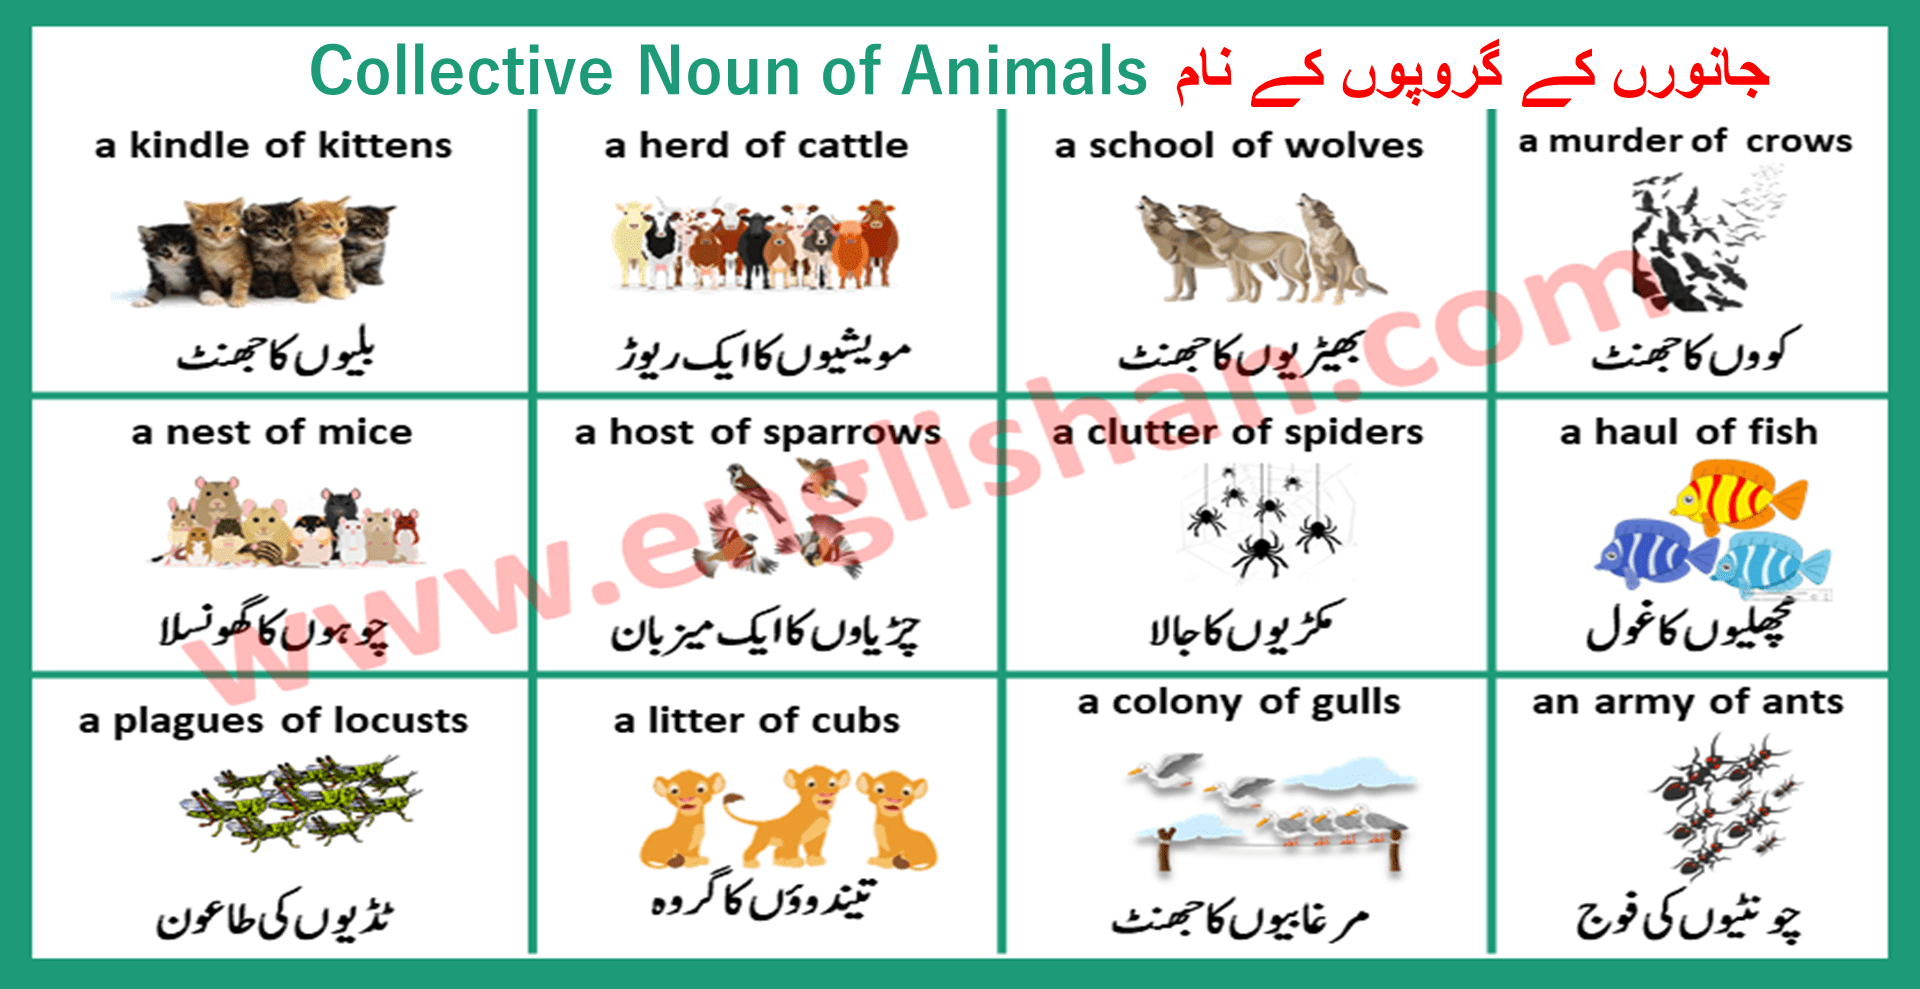 collective nouns for each type of animal